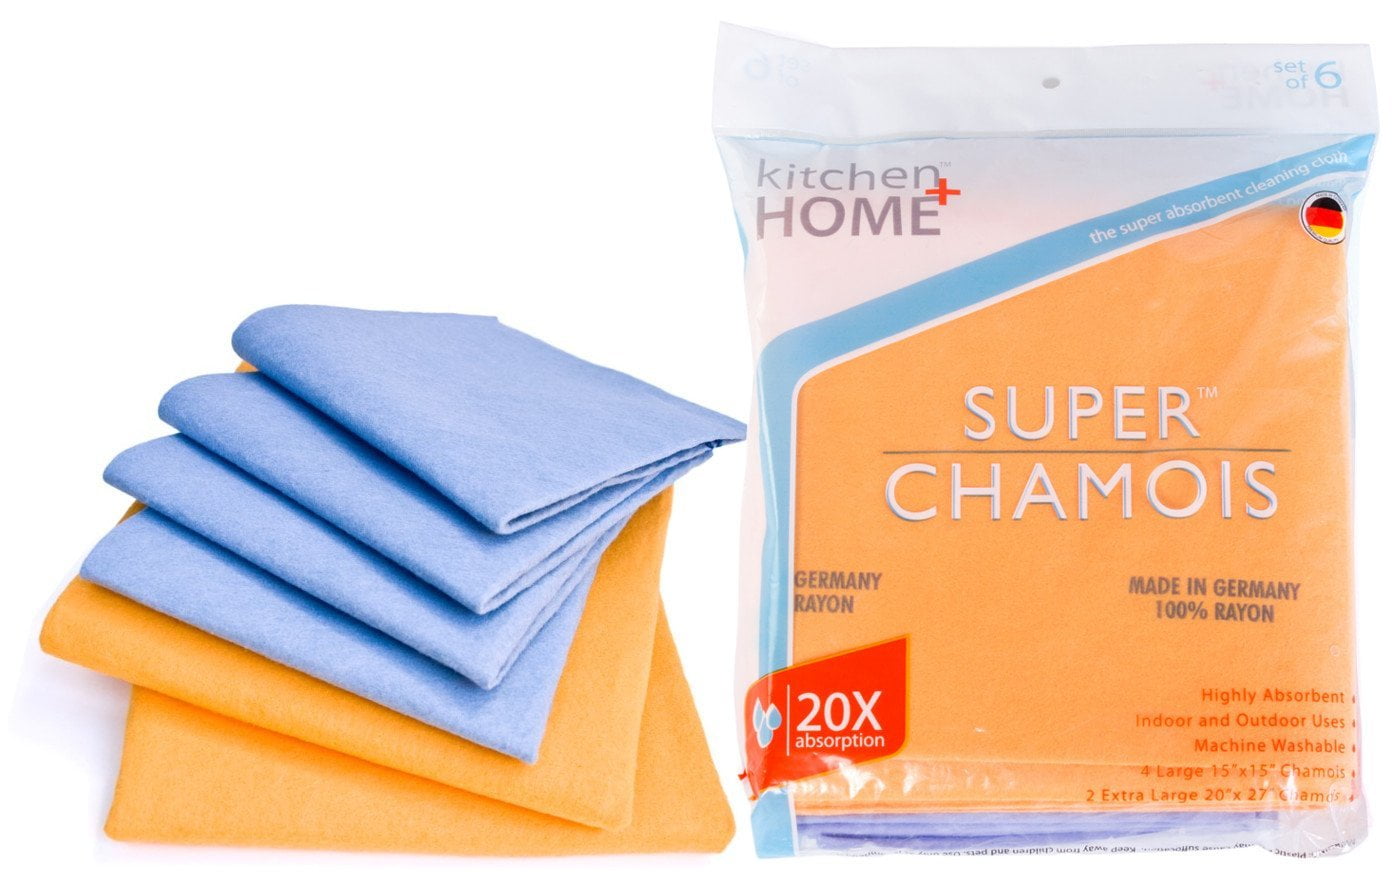  Small Reusable Cleaning Cloths, 6 x 10 inch, Super